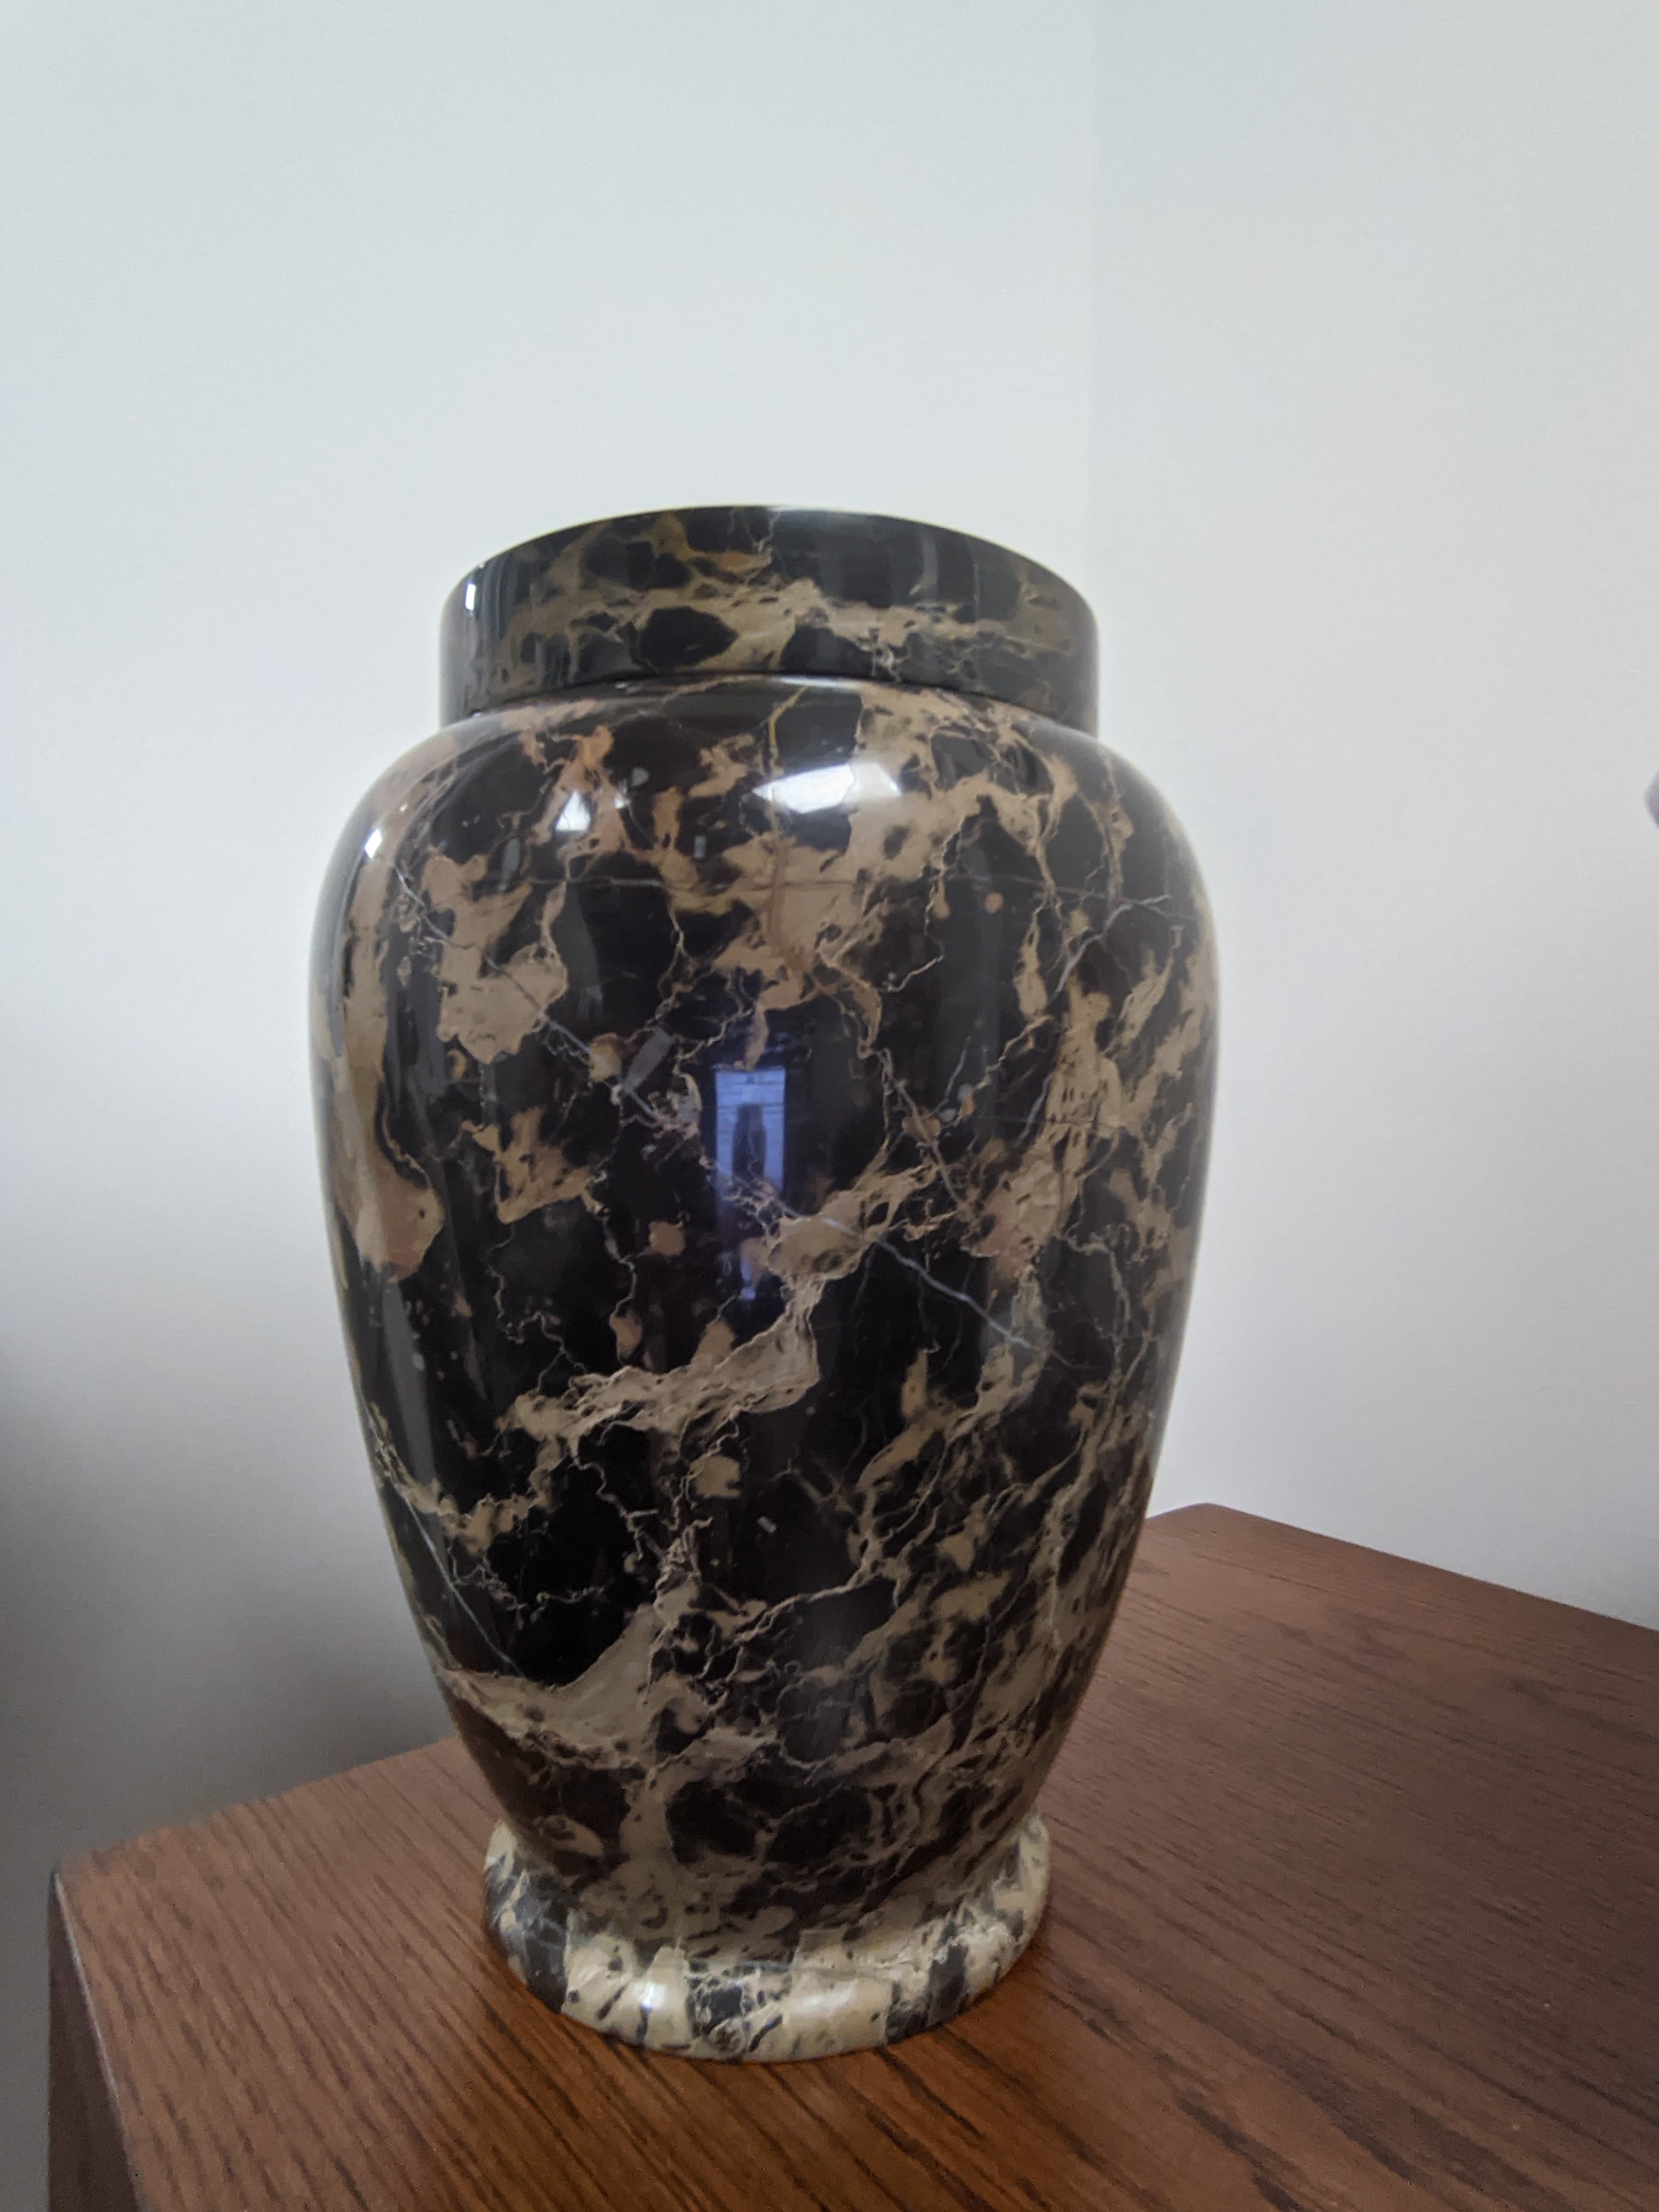 Black and Brown Stone Urn
$350.00